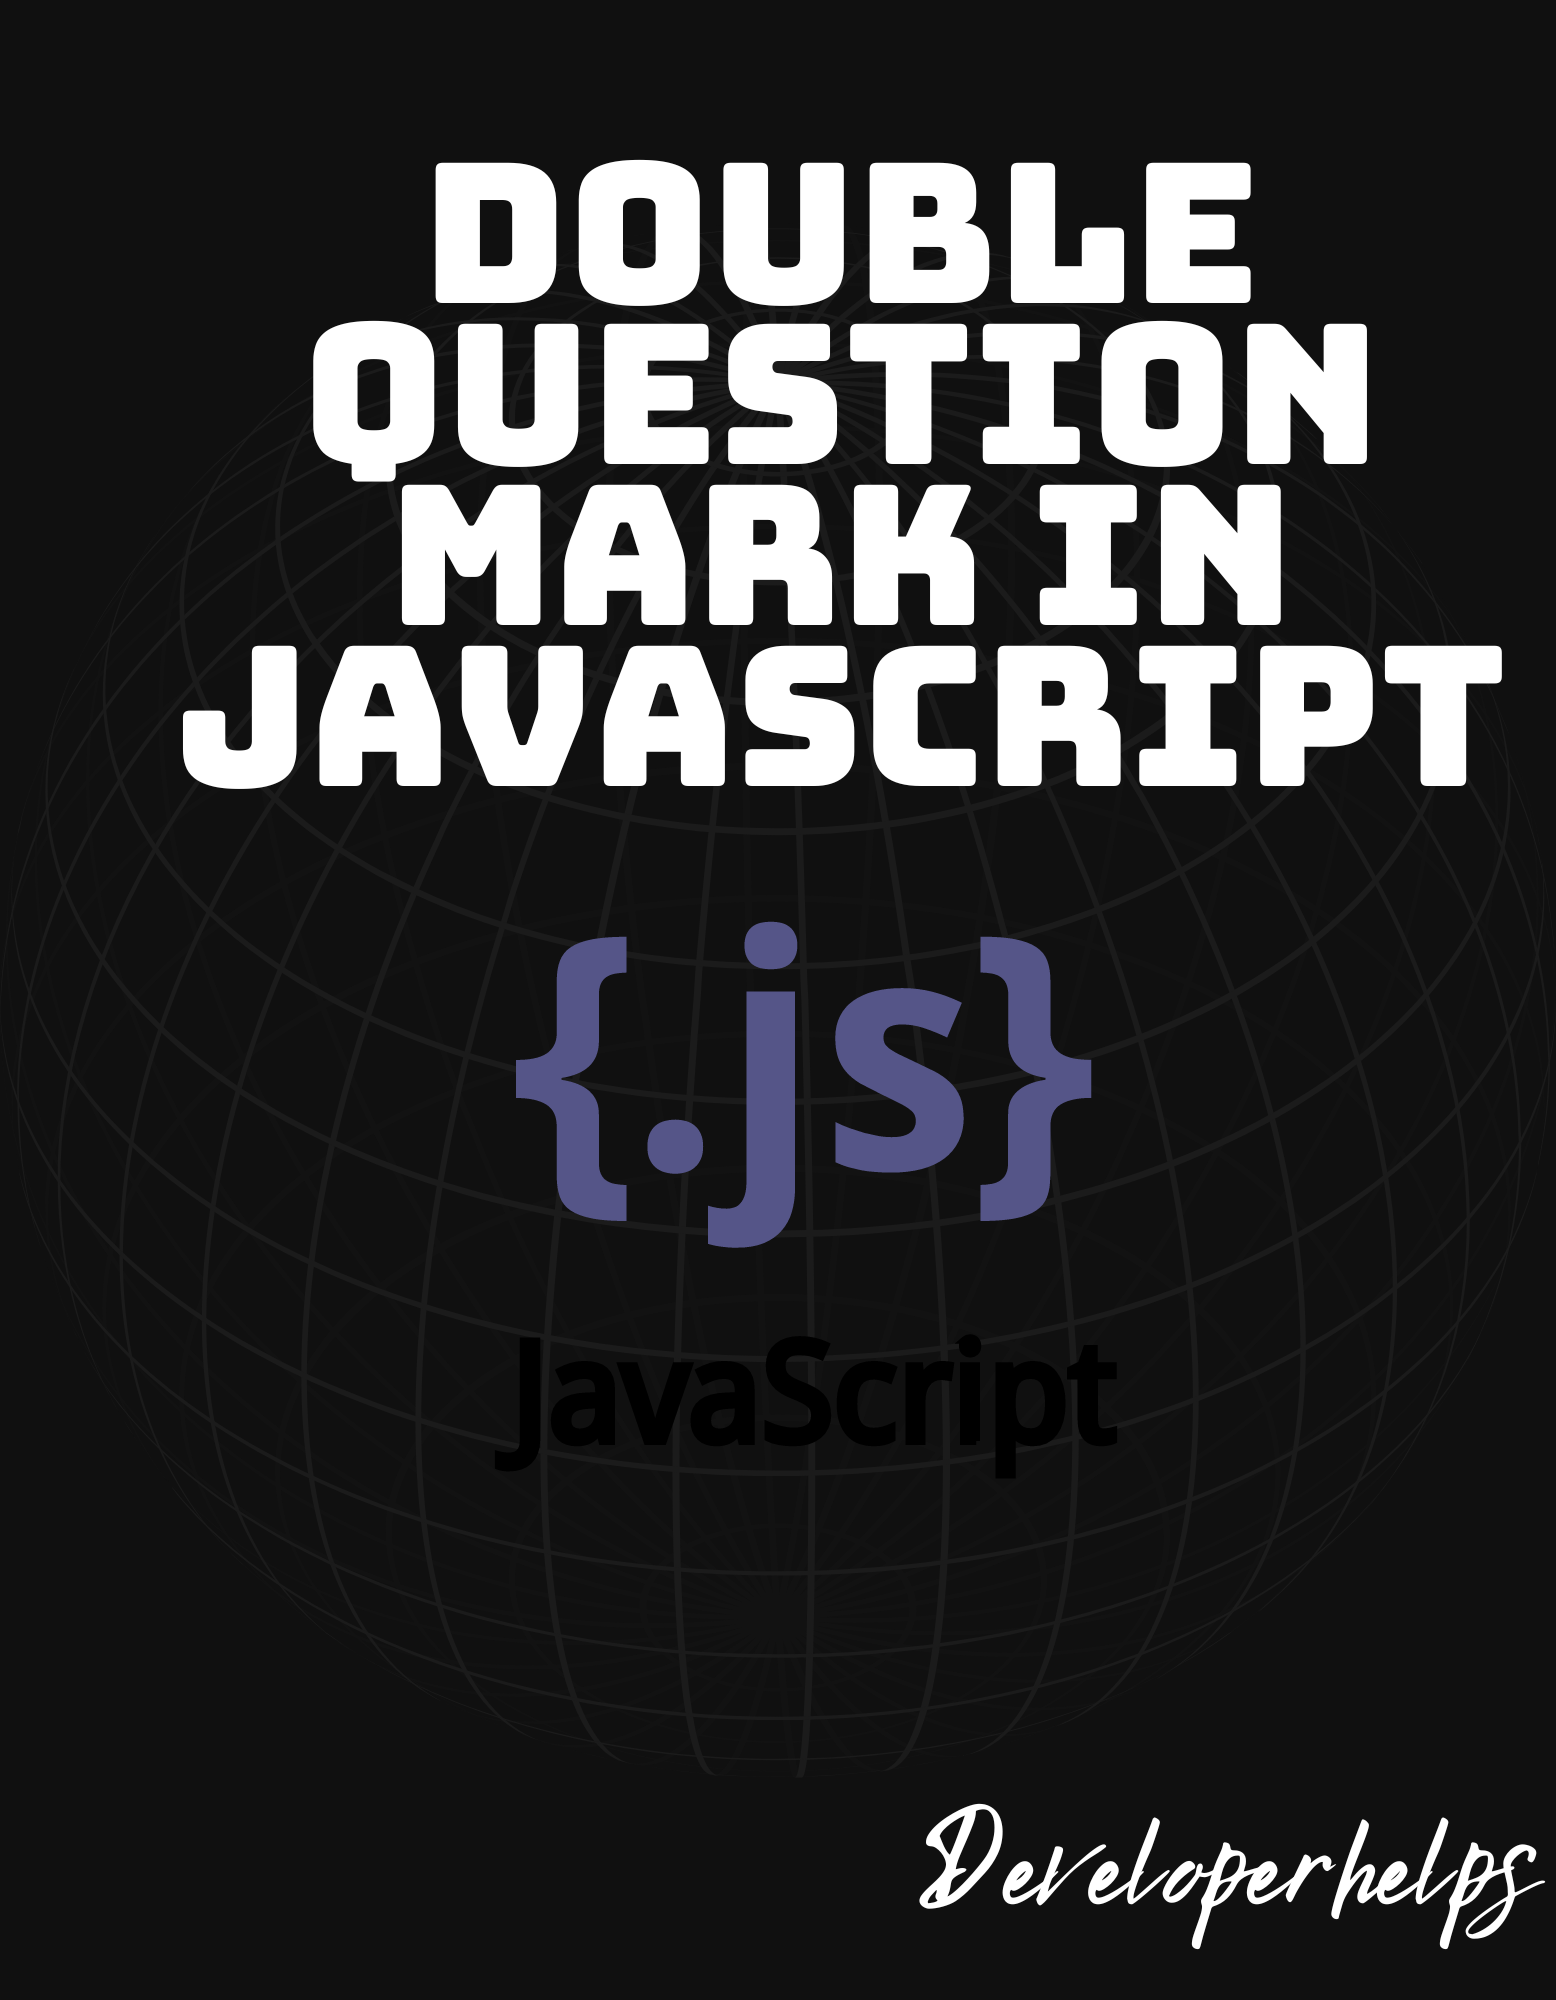 What is the Double Question Mark in JavaScript?